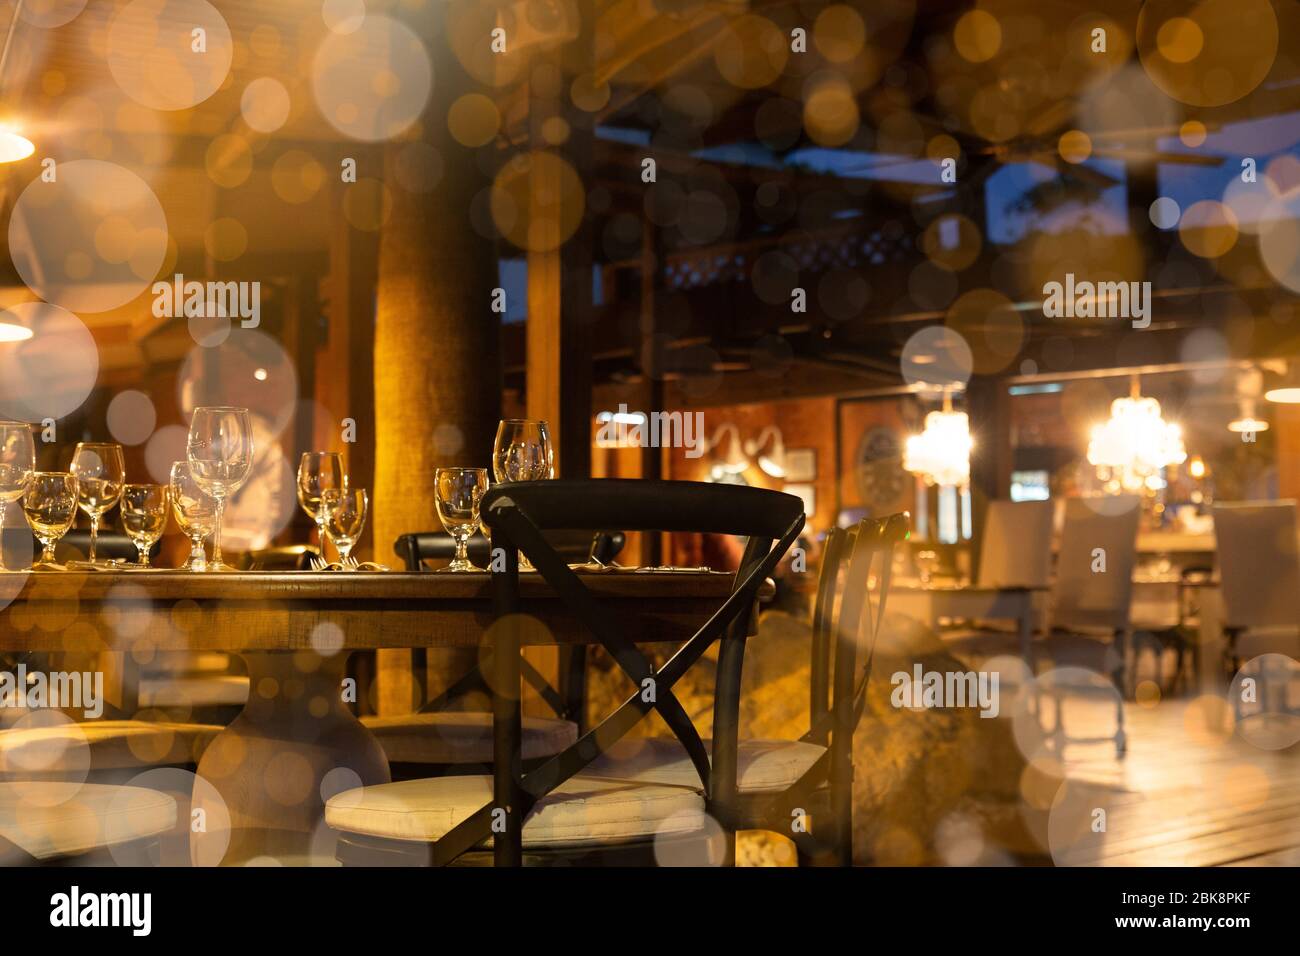 Interior  restaurant with warm lighting and empty tables Stock Photo